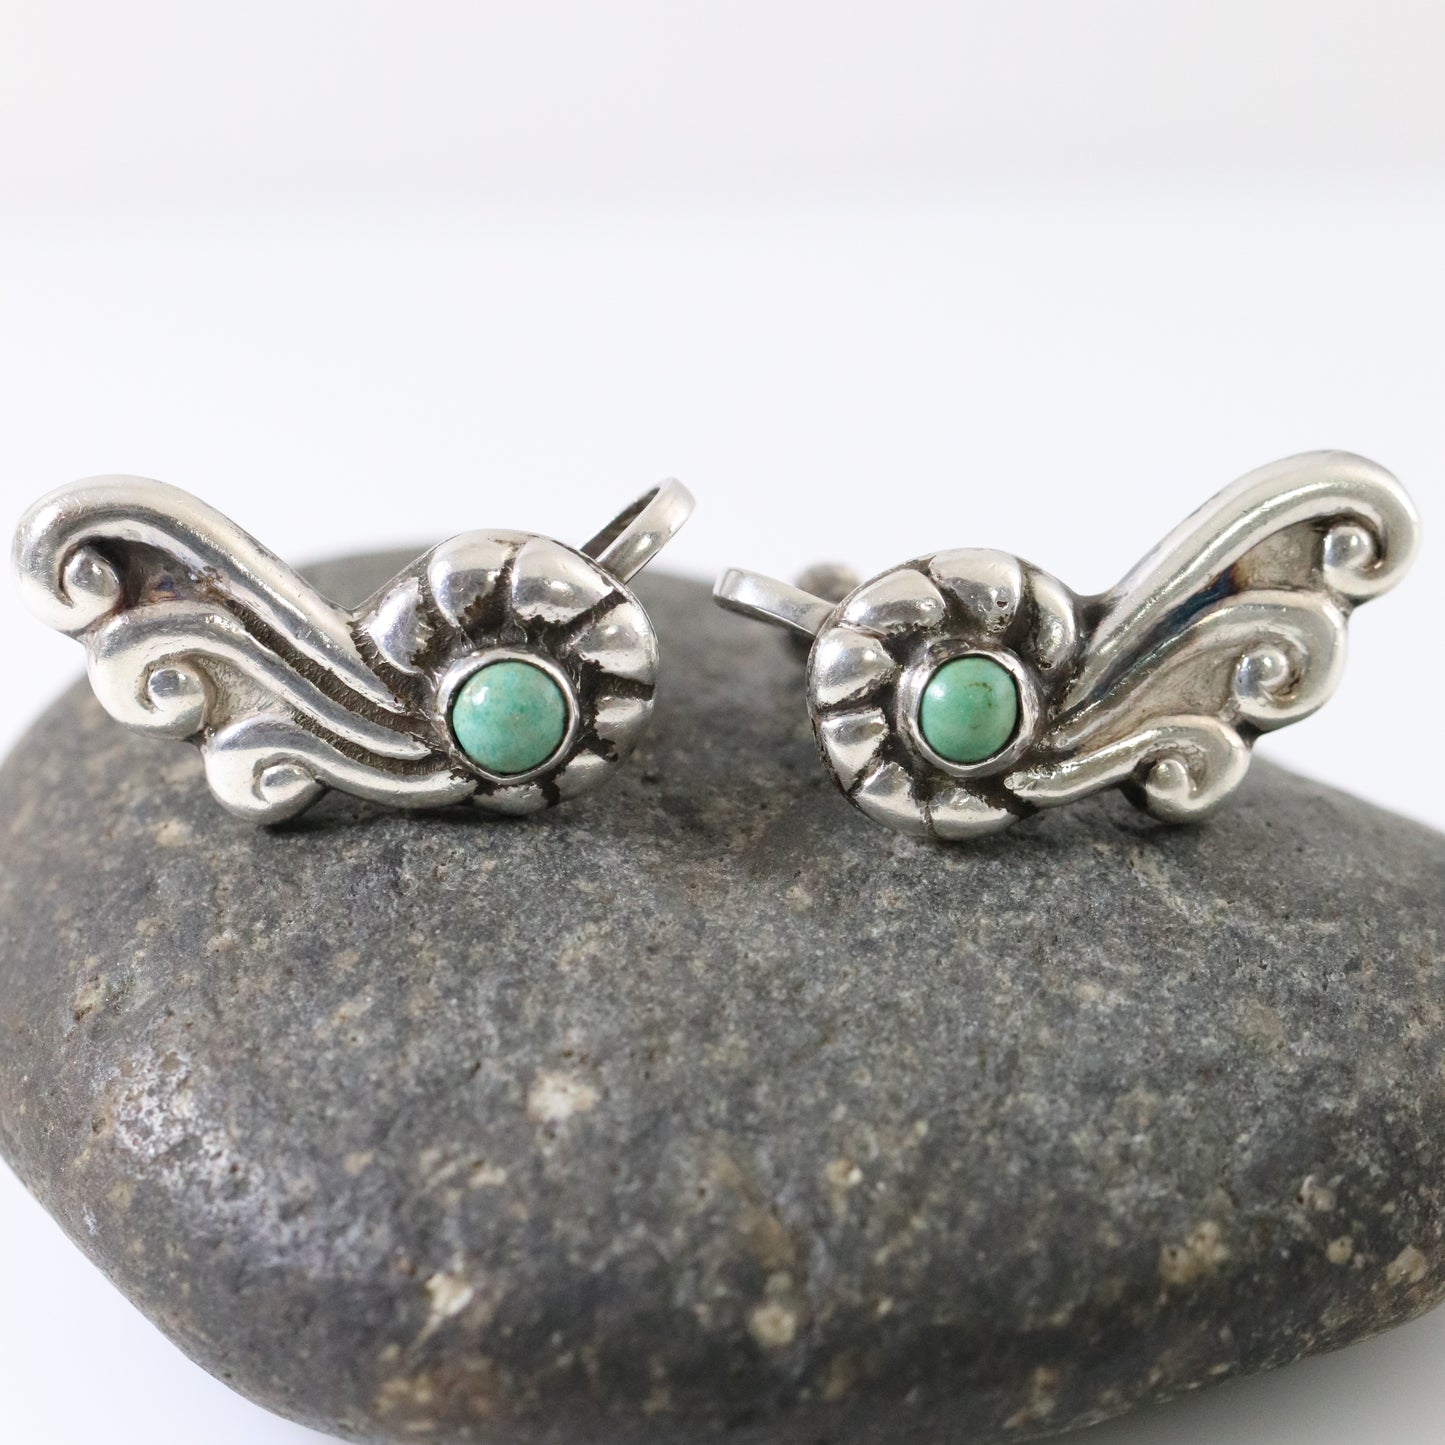 Vintage Silver Mexican Jewelry | Turquoise Winged Screwback Earrings